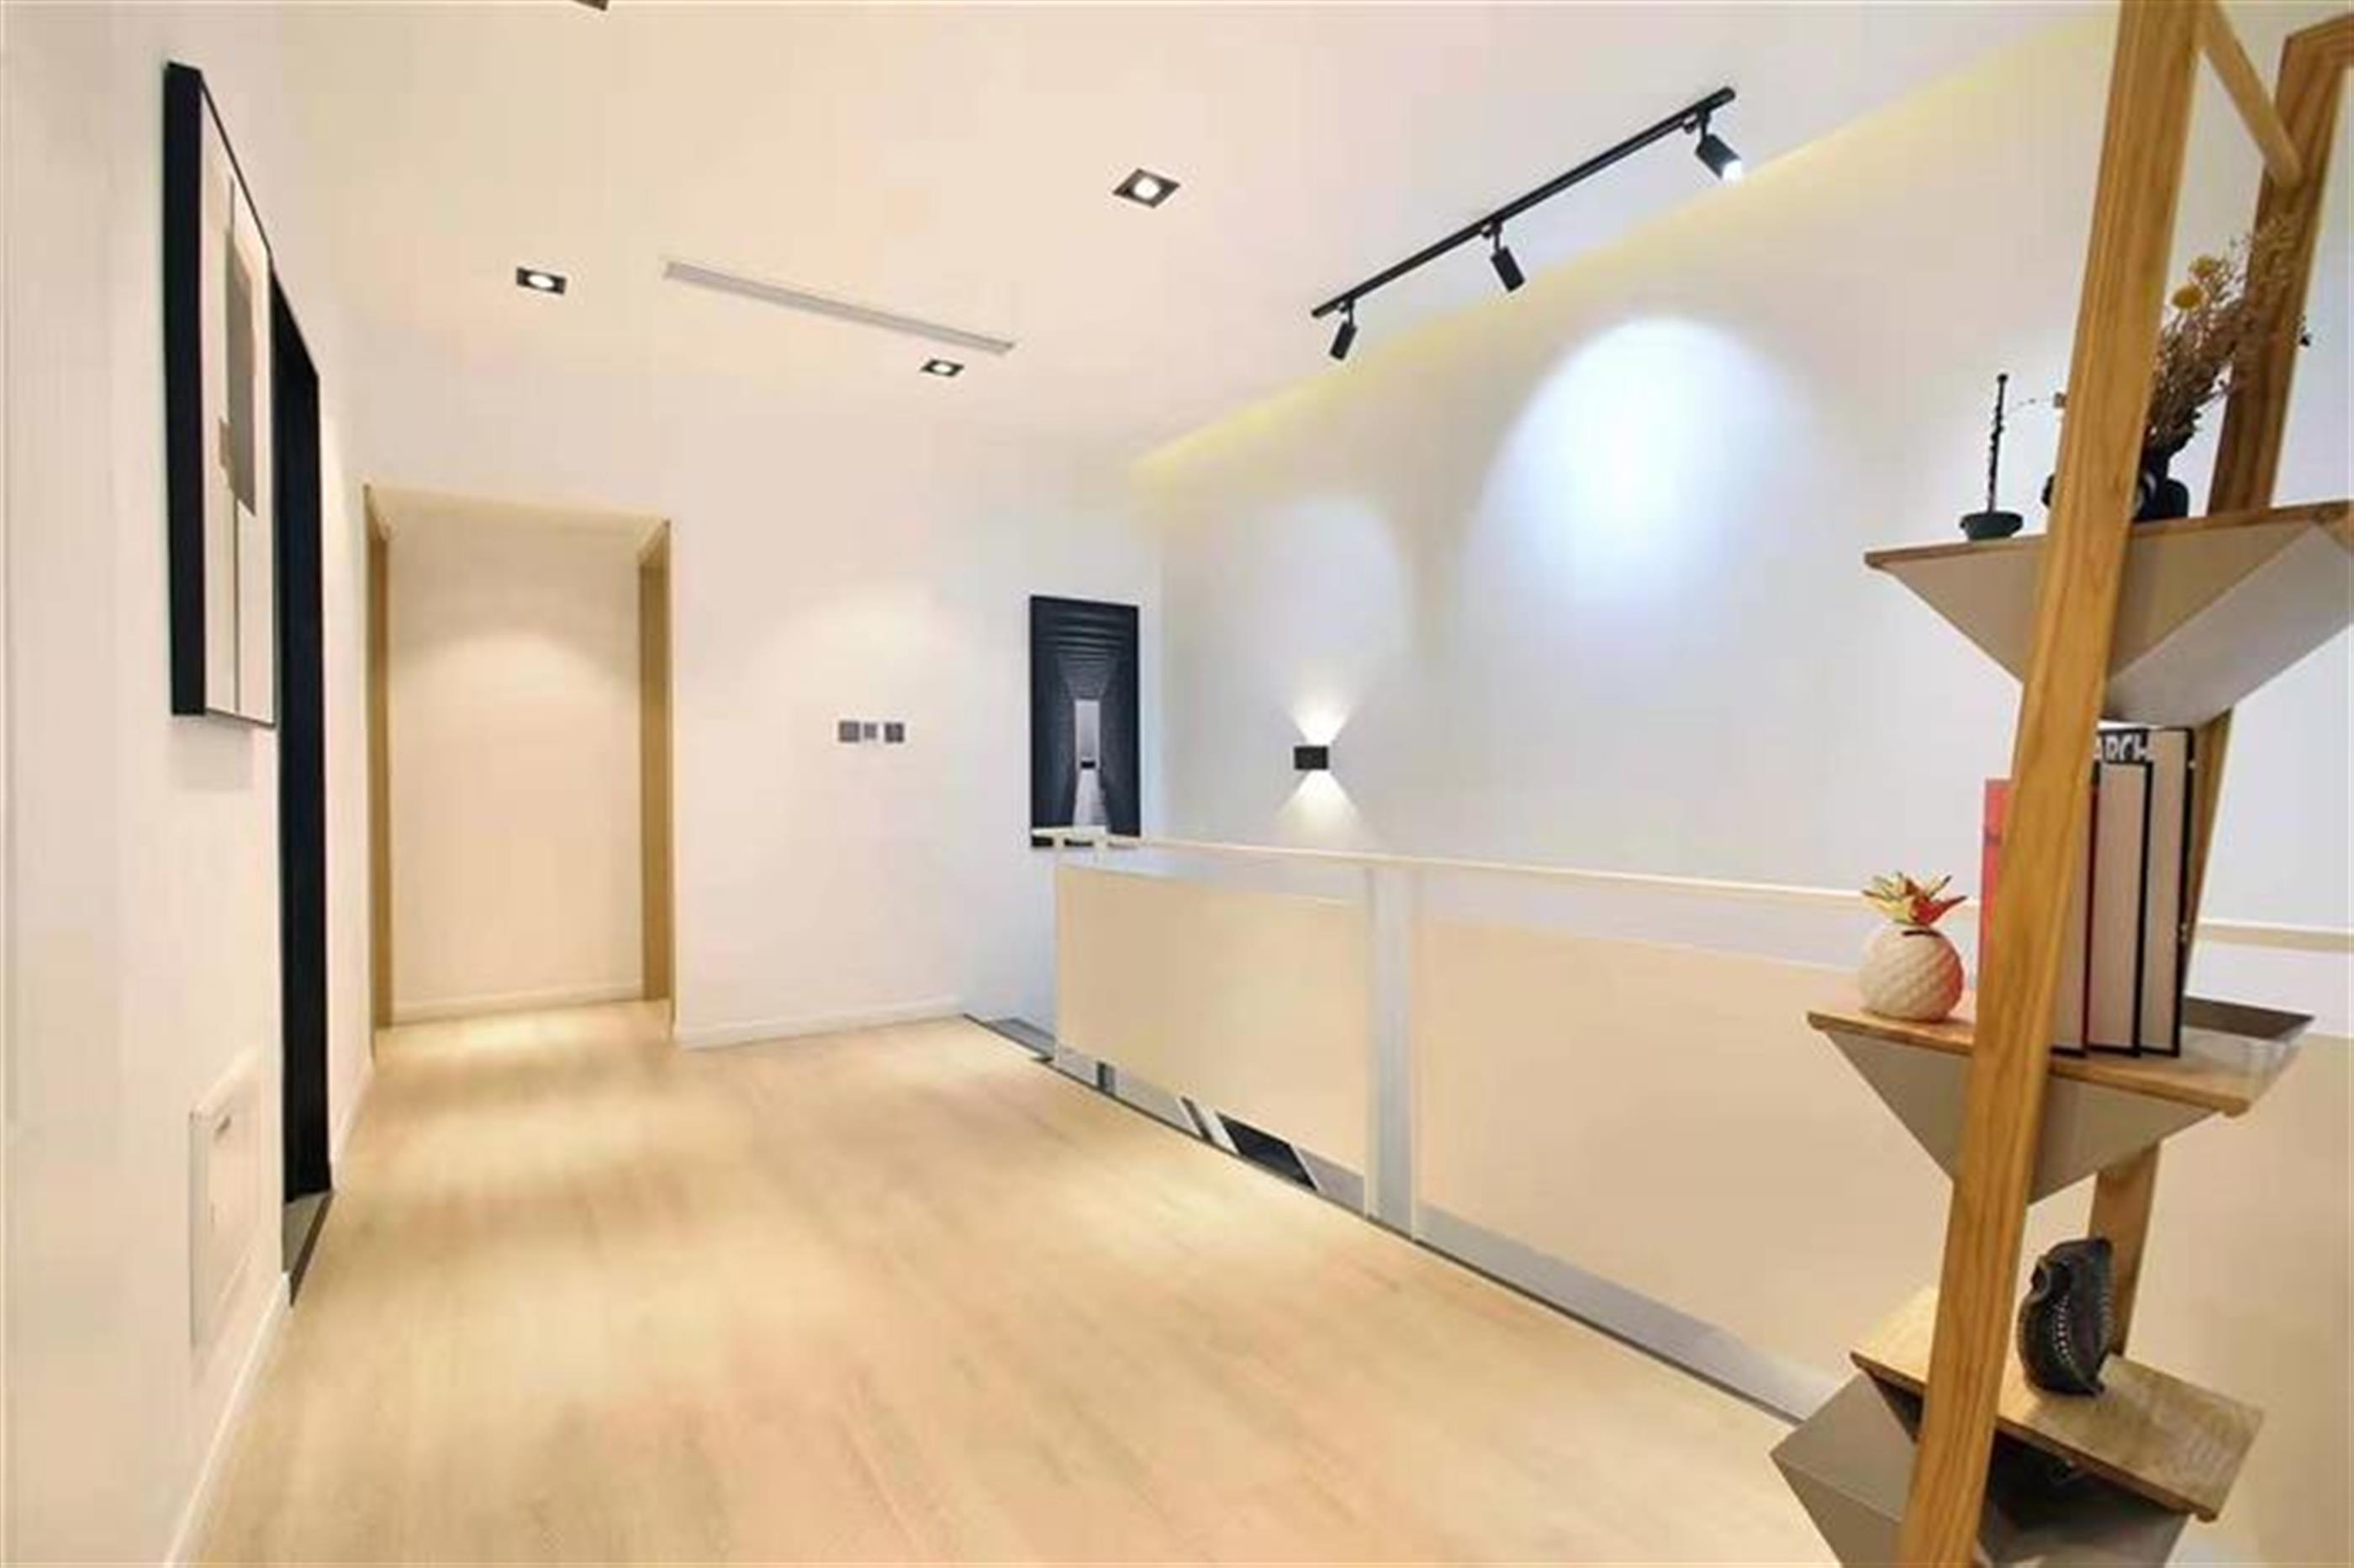 bright floors Newly-decorated Modern Bright Spacious 4BR Xintiandi Duplex for Rent in Shanghai LN 10/13